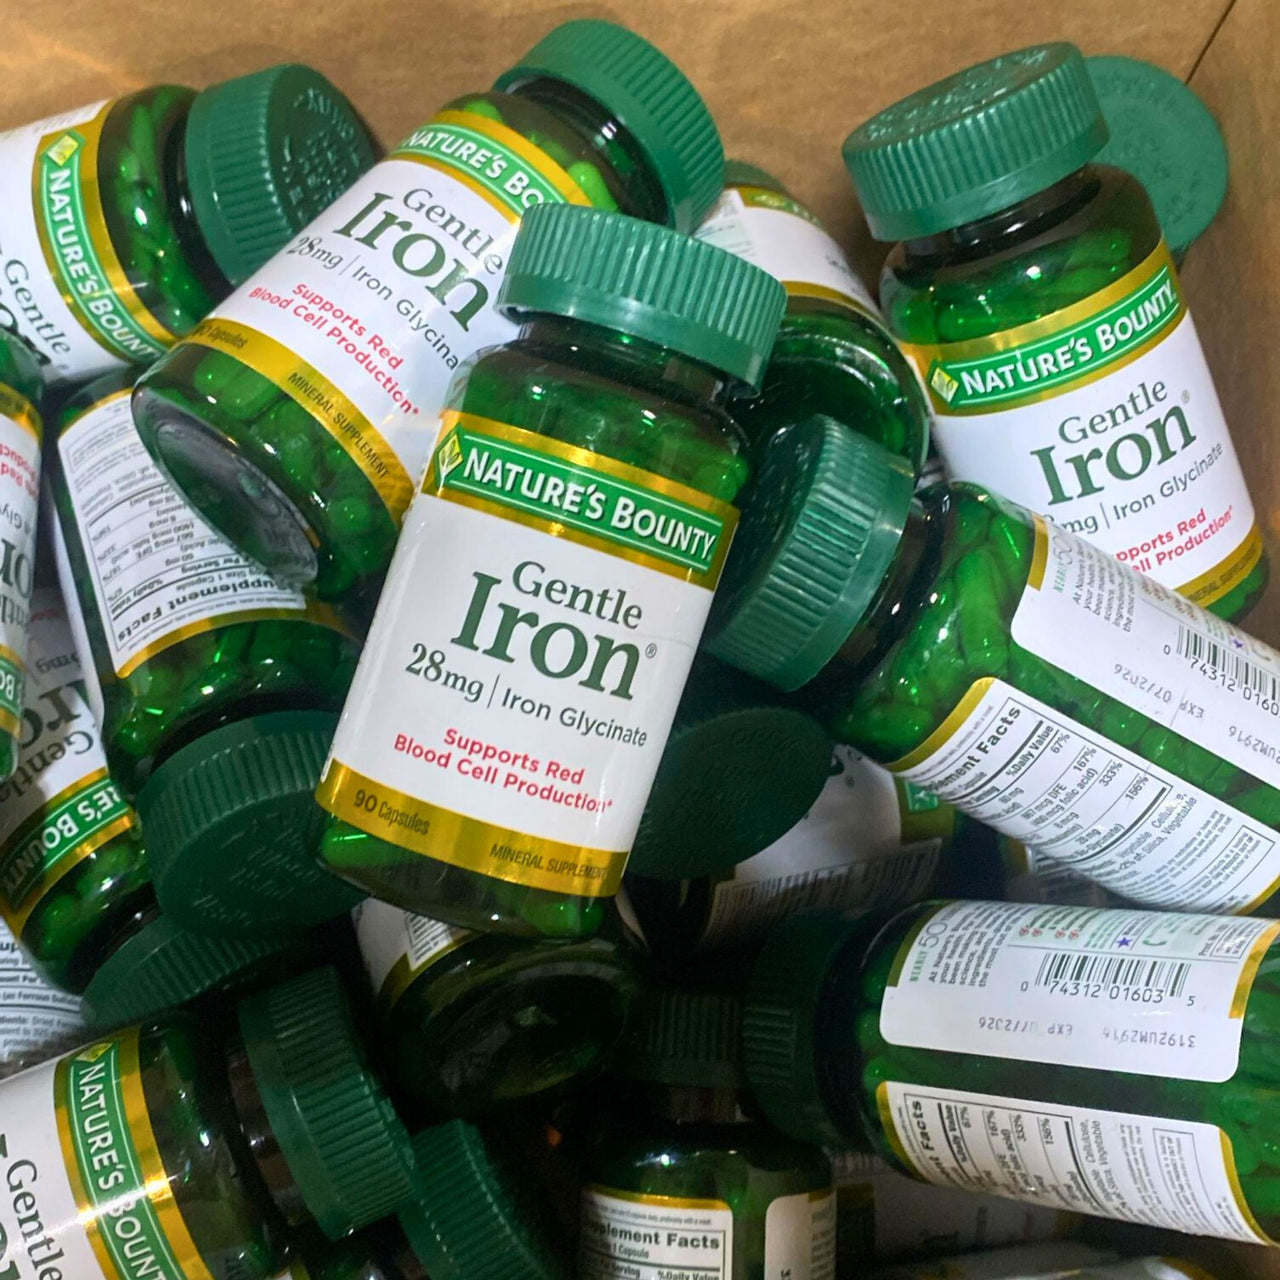 Gentle Iron 28mg Iron Glycinate Supports Red Blood Cell Production 